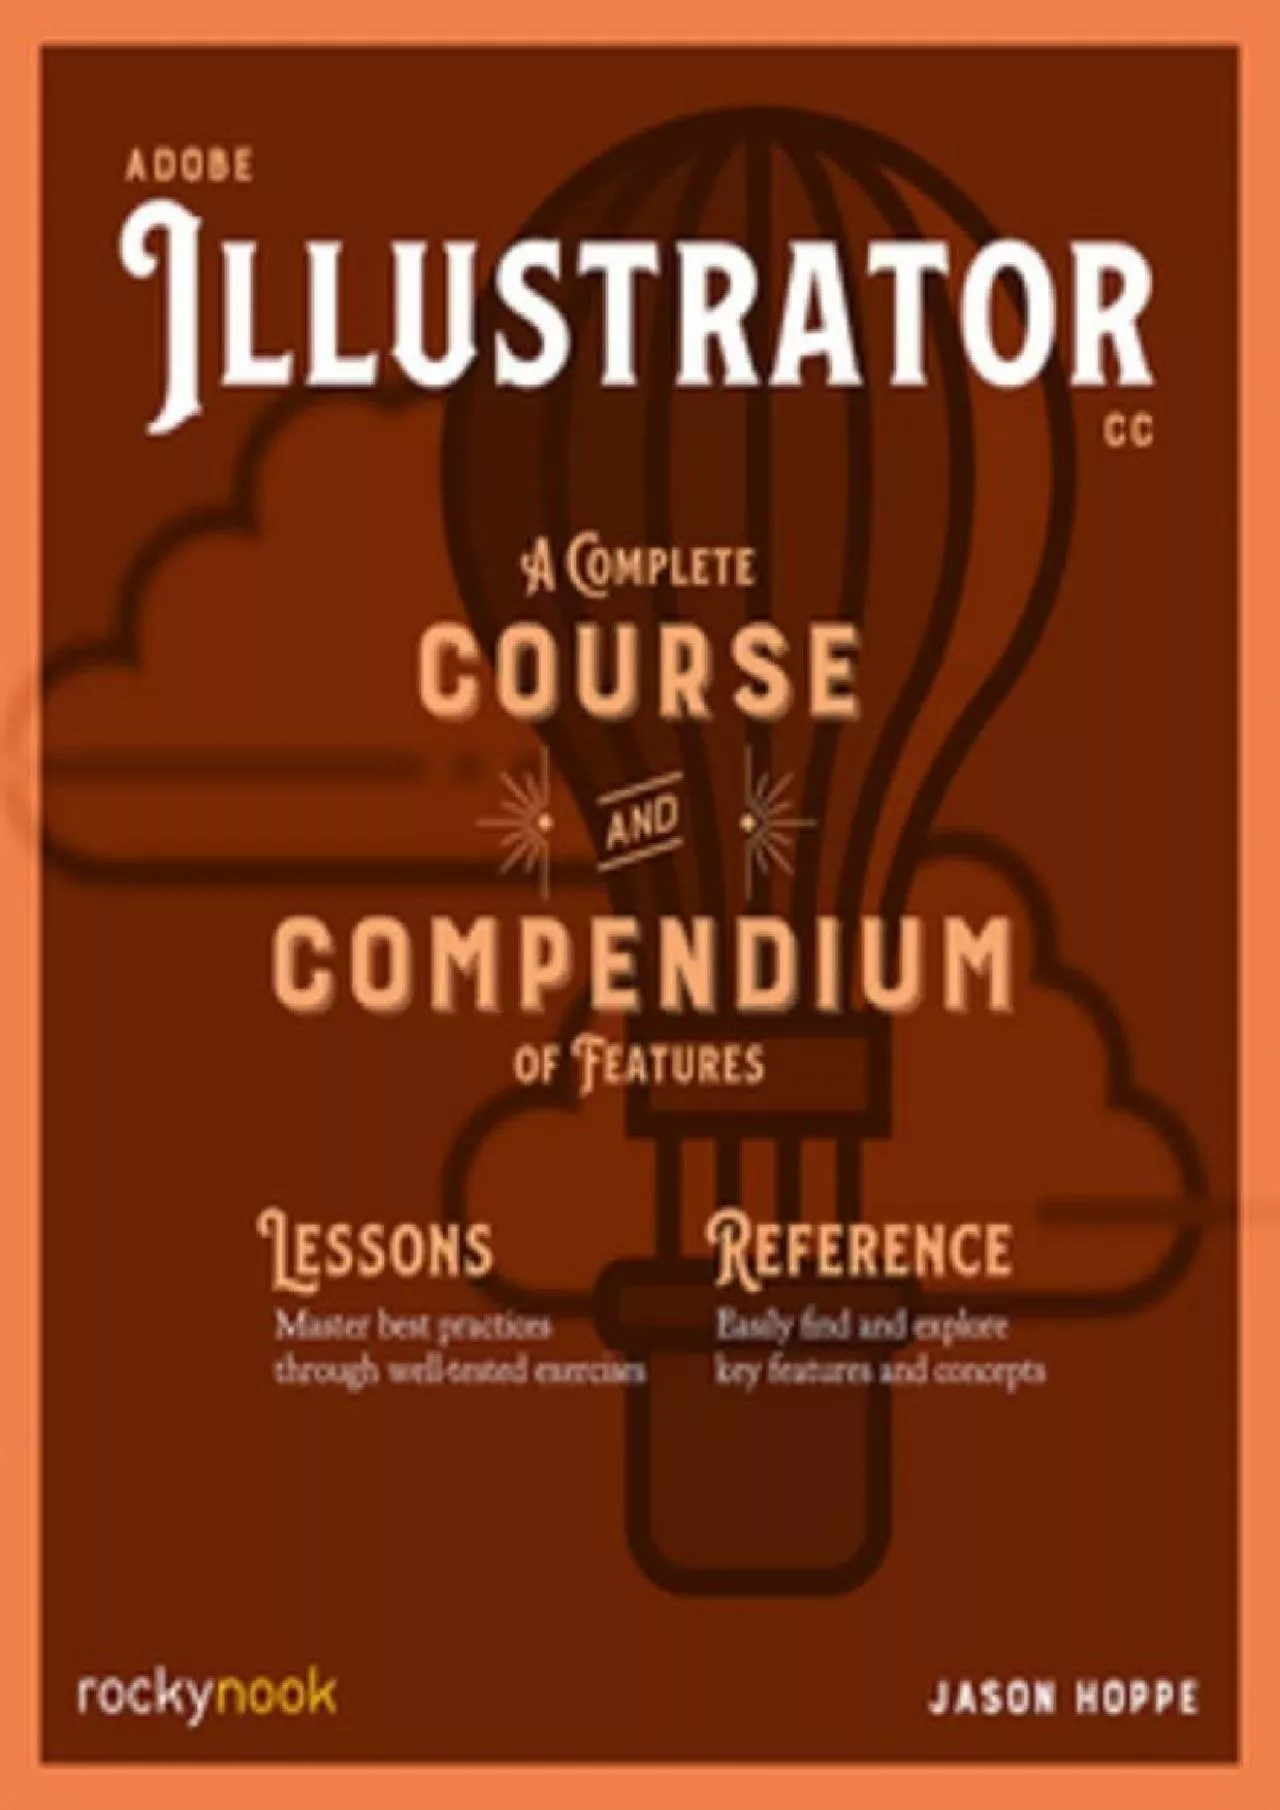 (DOWNLOAD)-Adobe Illustrator: A Complete Course and Compendium of Features